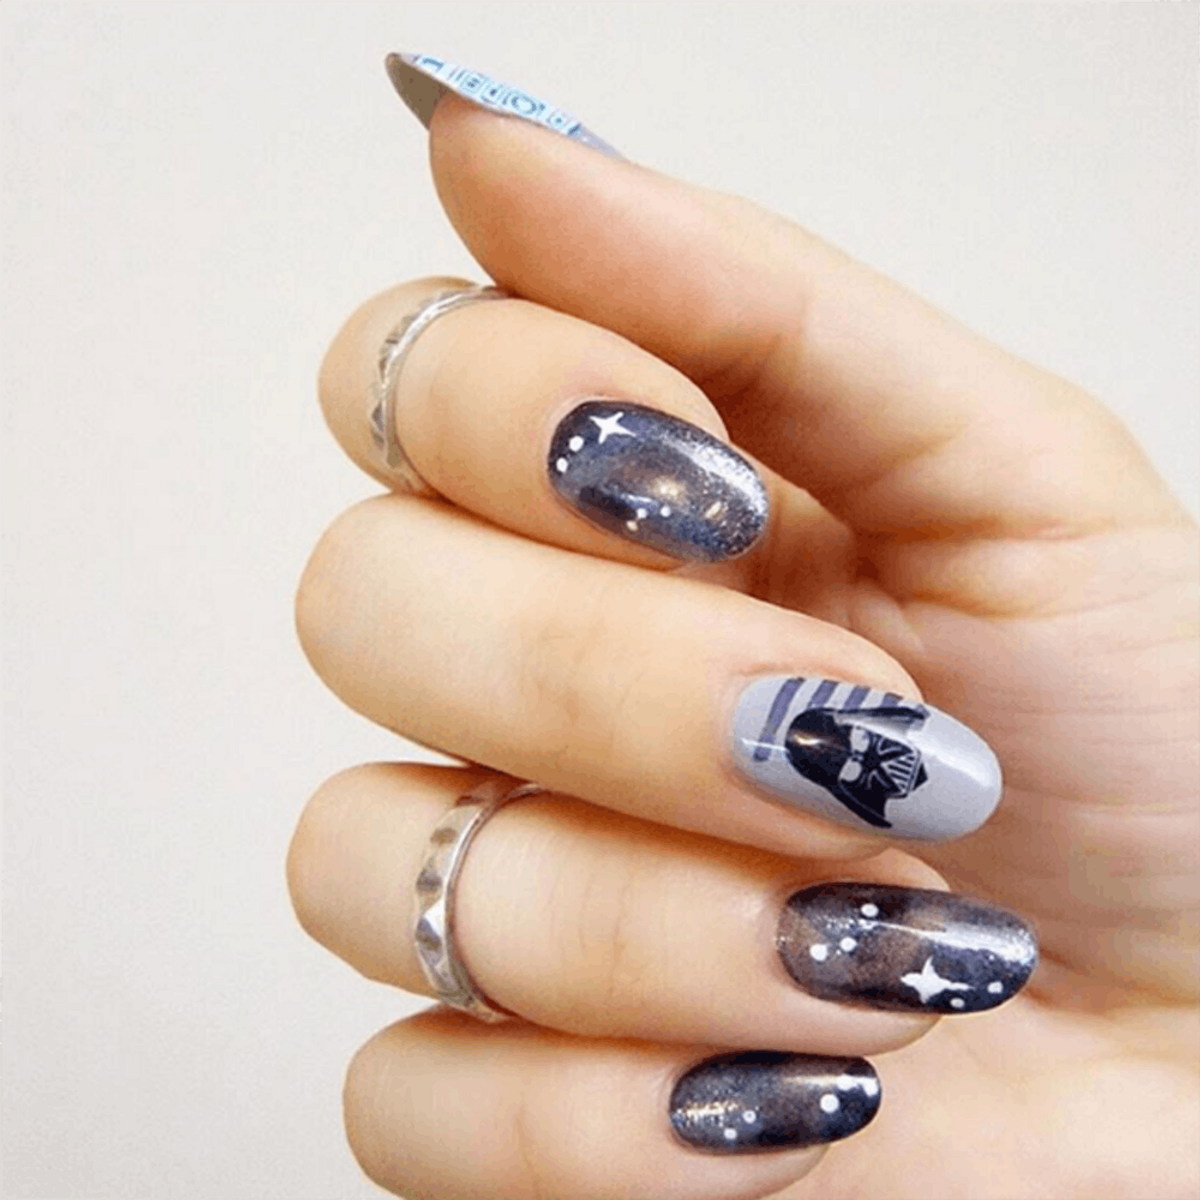 12 Star Wars Manicures to Honor Your Inner Princess Leia